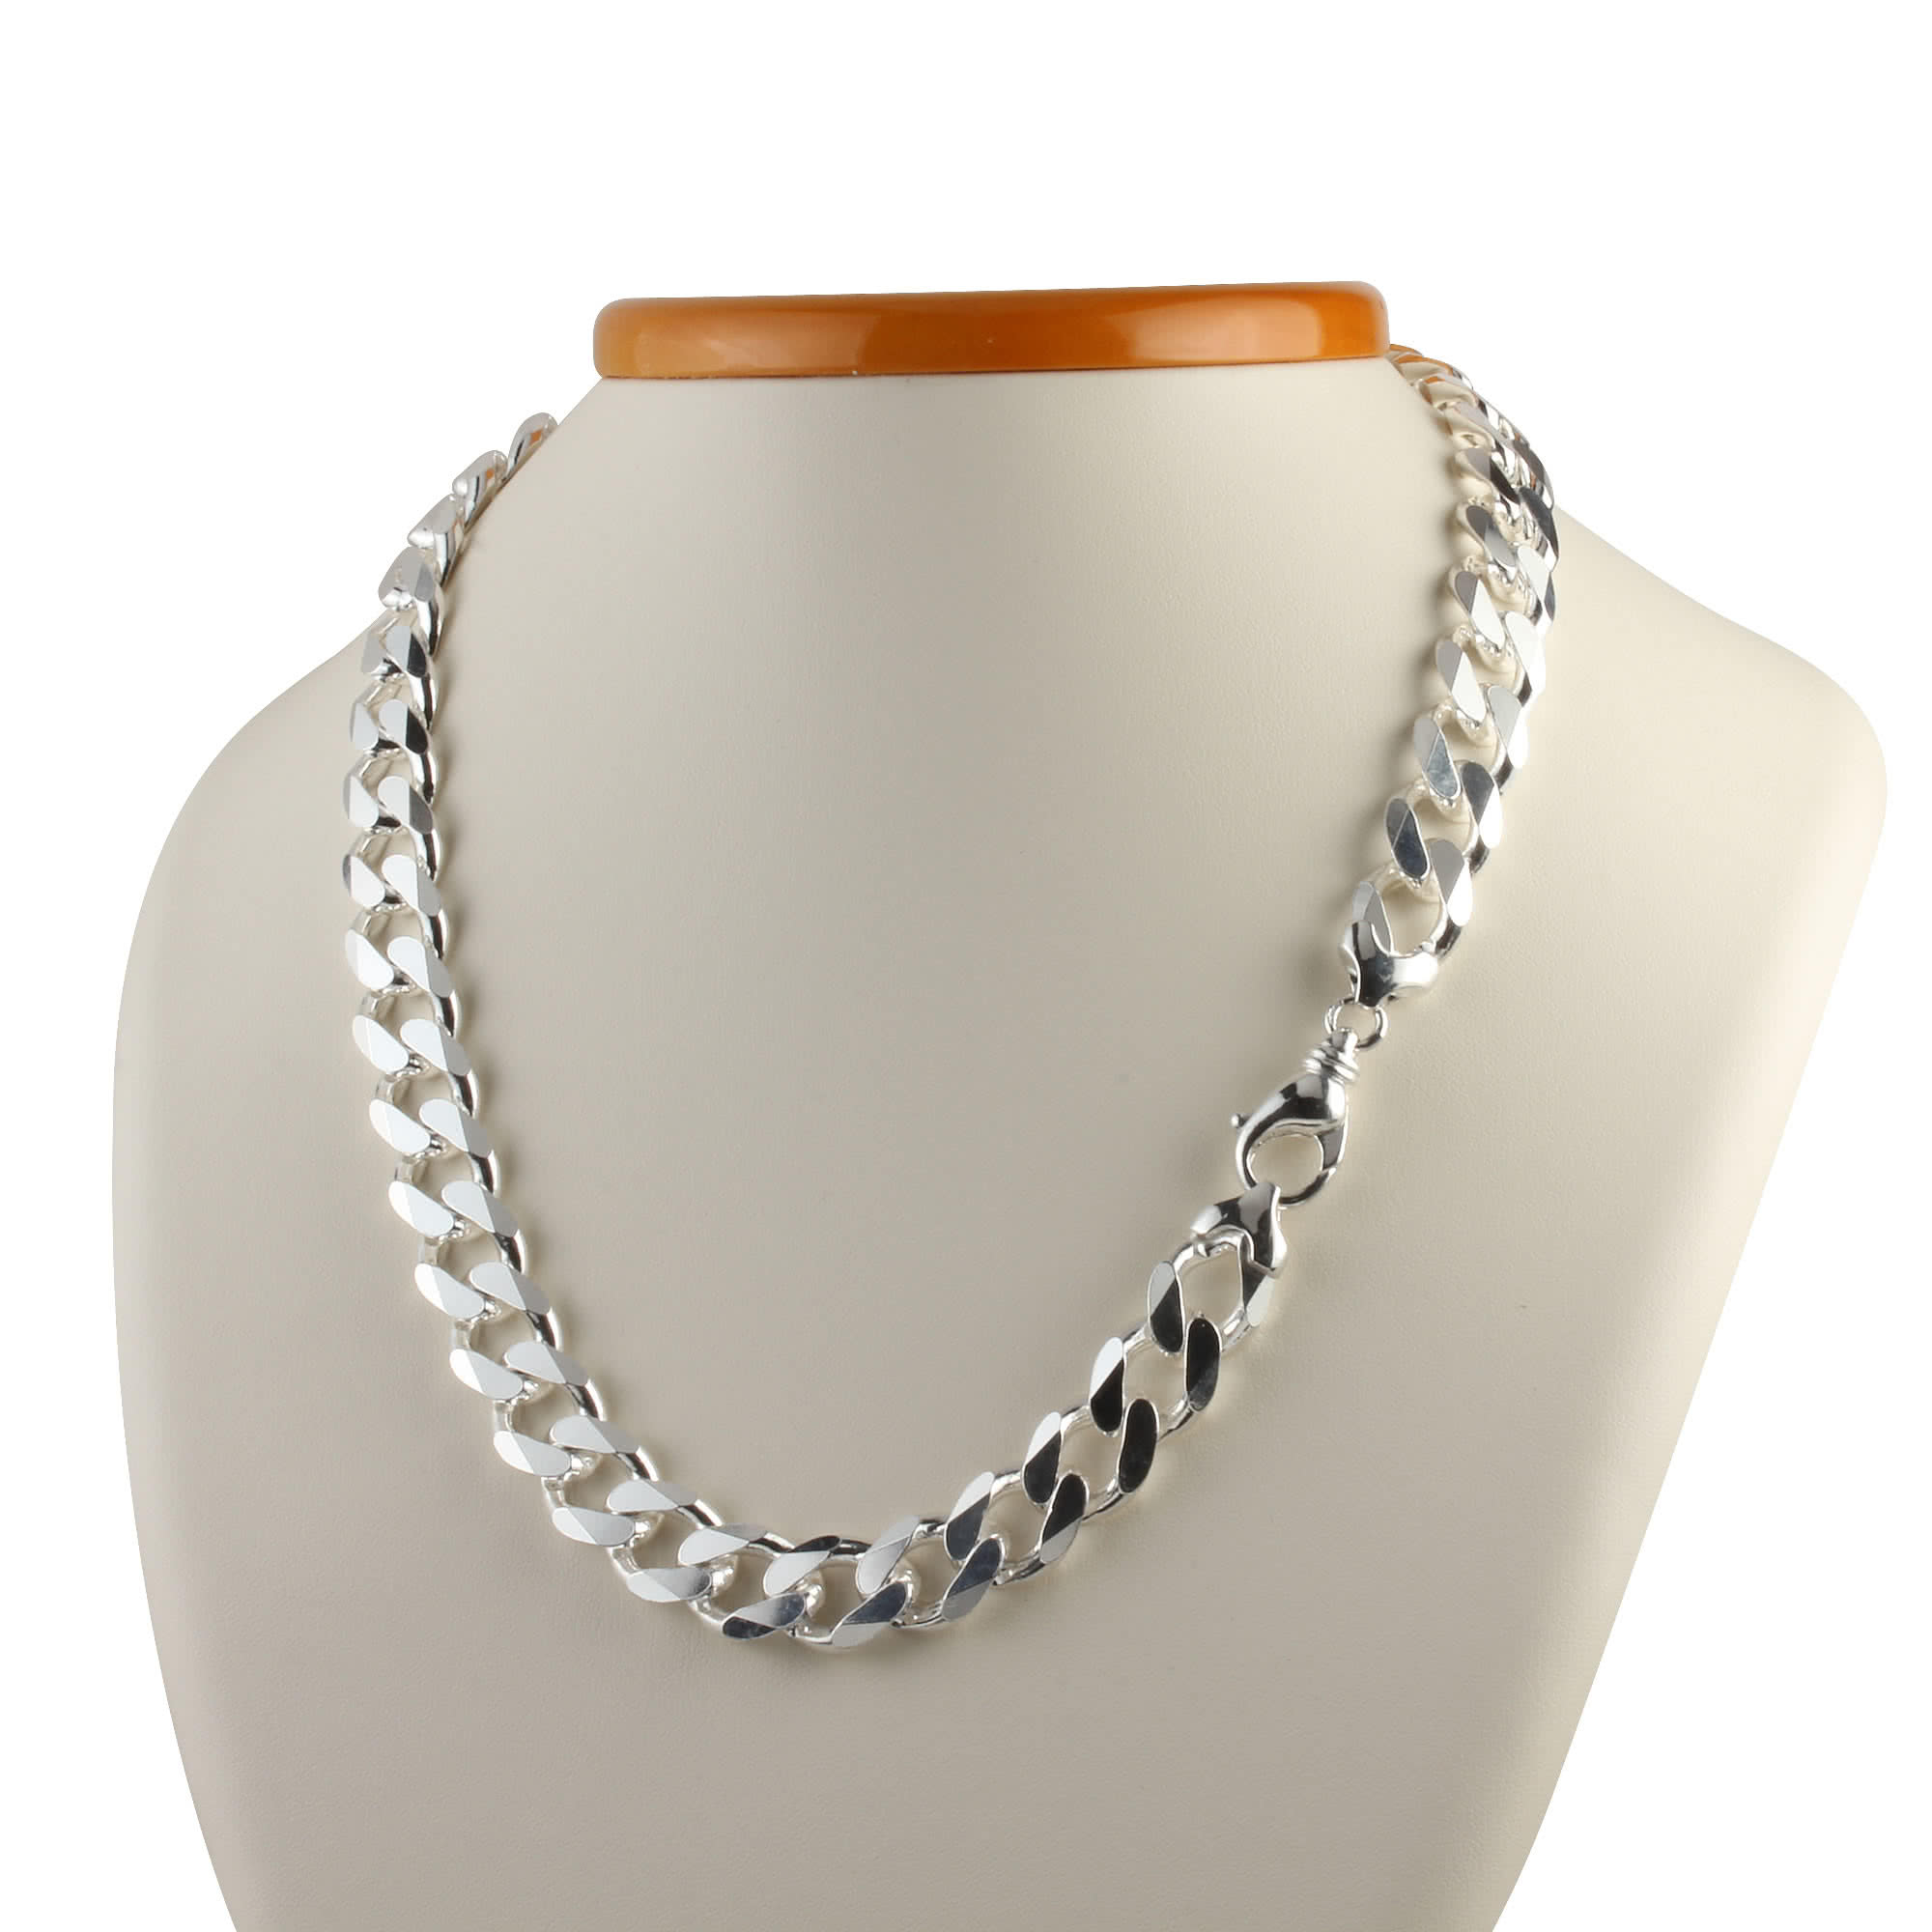 5.5mm Silver Polished Stainless Steel Curb Link Chain Necklace 20 Inch for Men